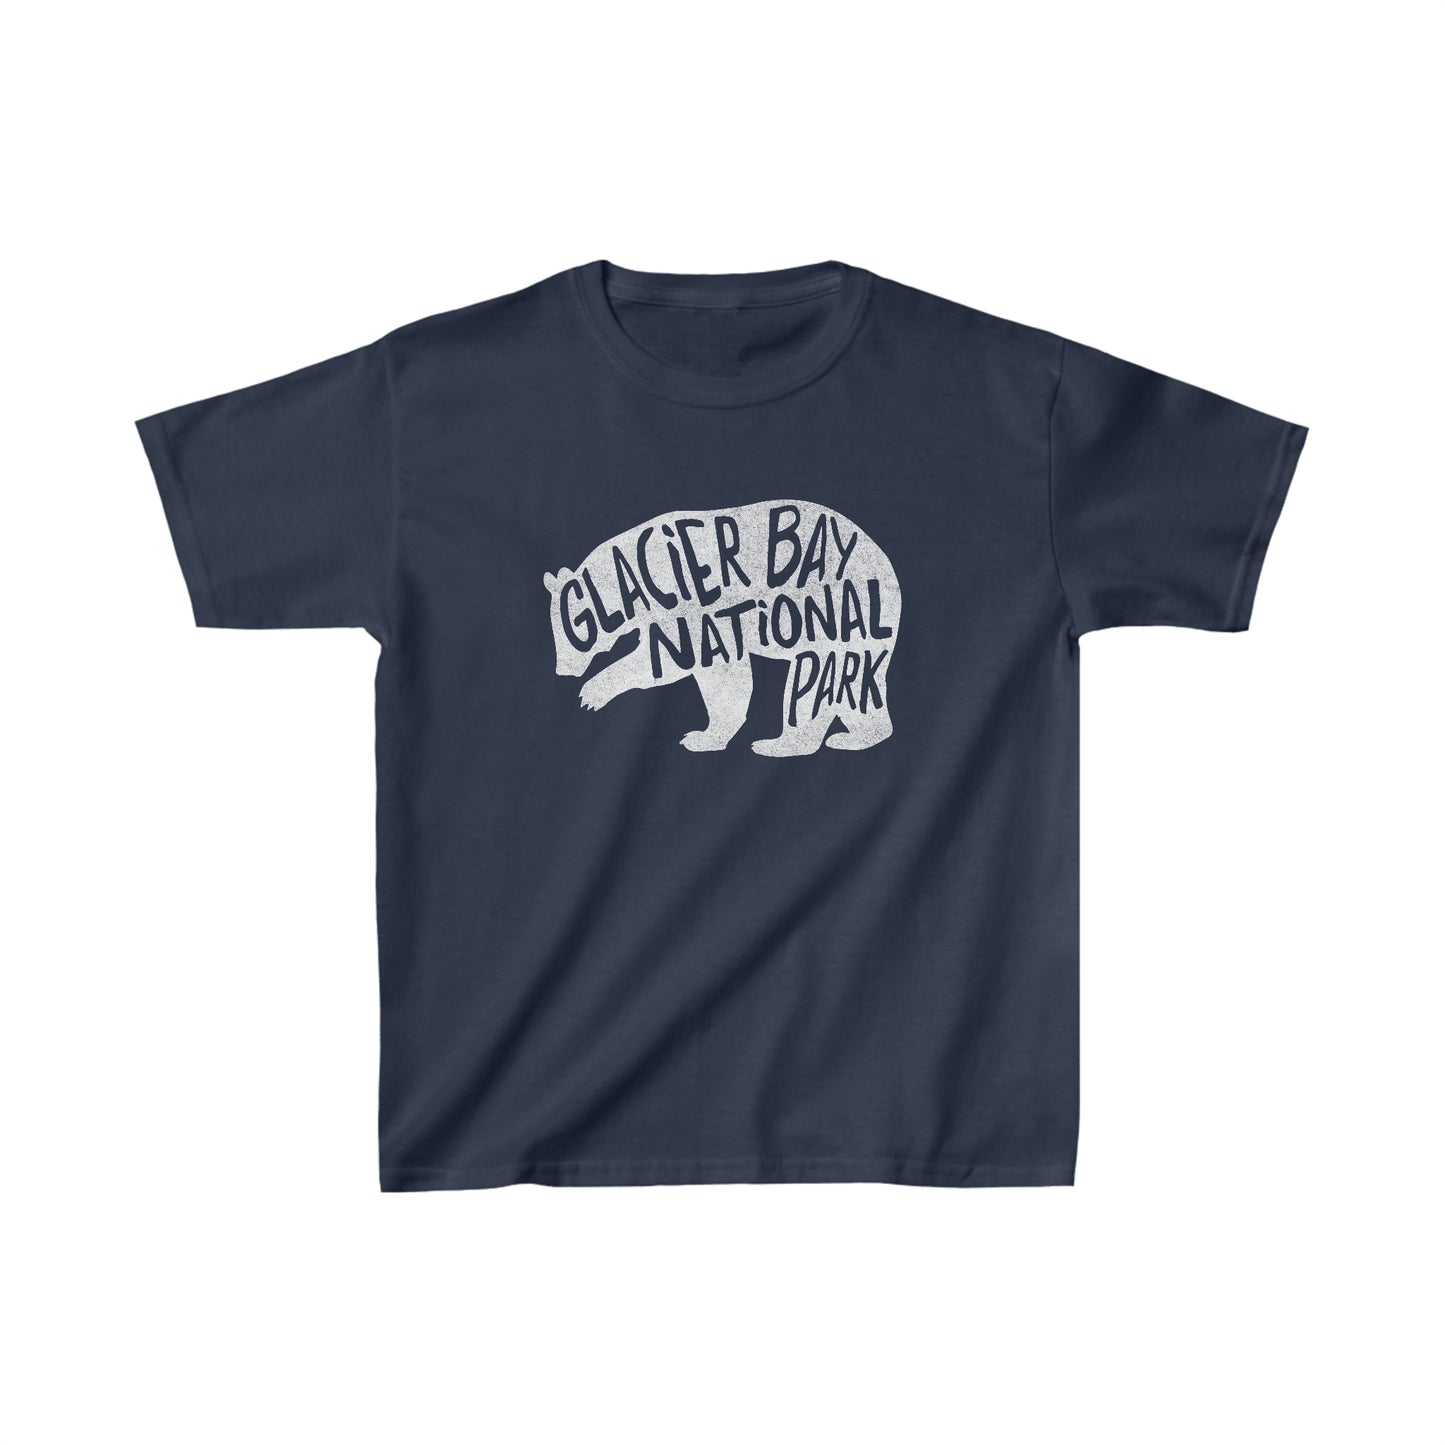 Glacier Bay National Park Child T-Shirt - Grizzly Bear Chunky Text